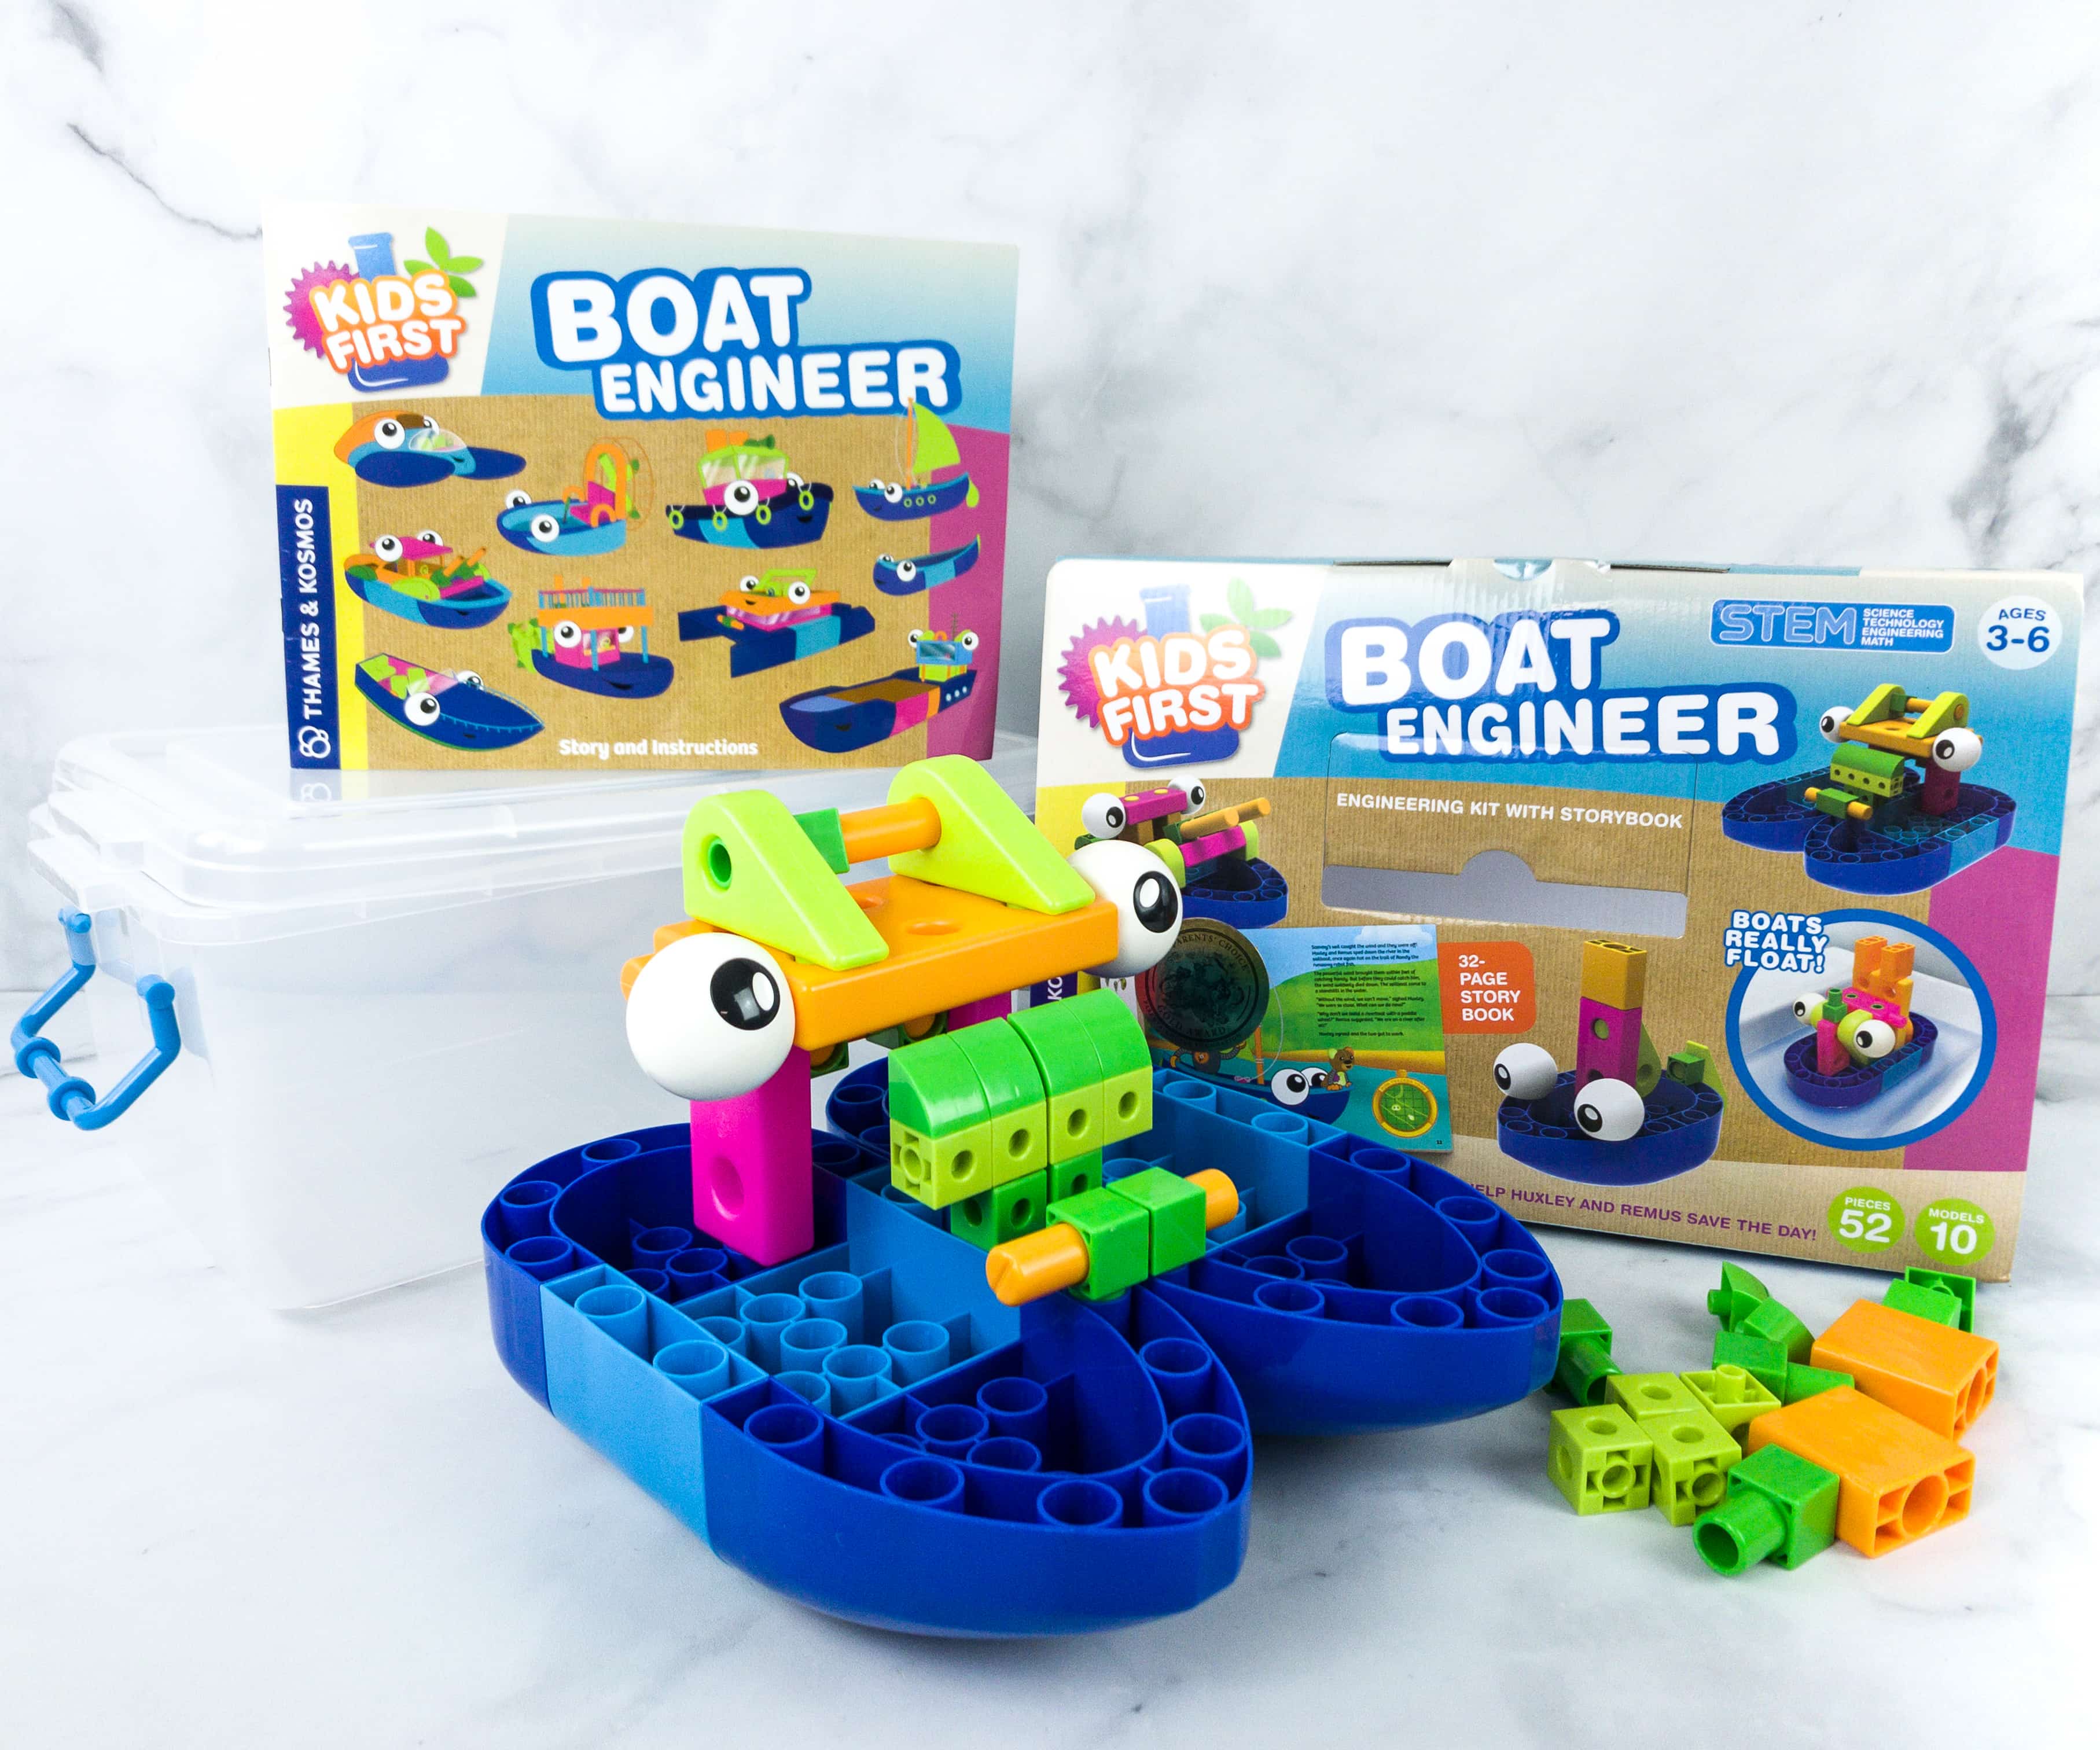 Kids First Boat Engineer By Thames & Kosmos 